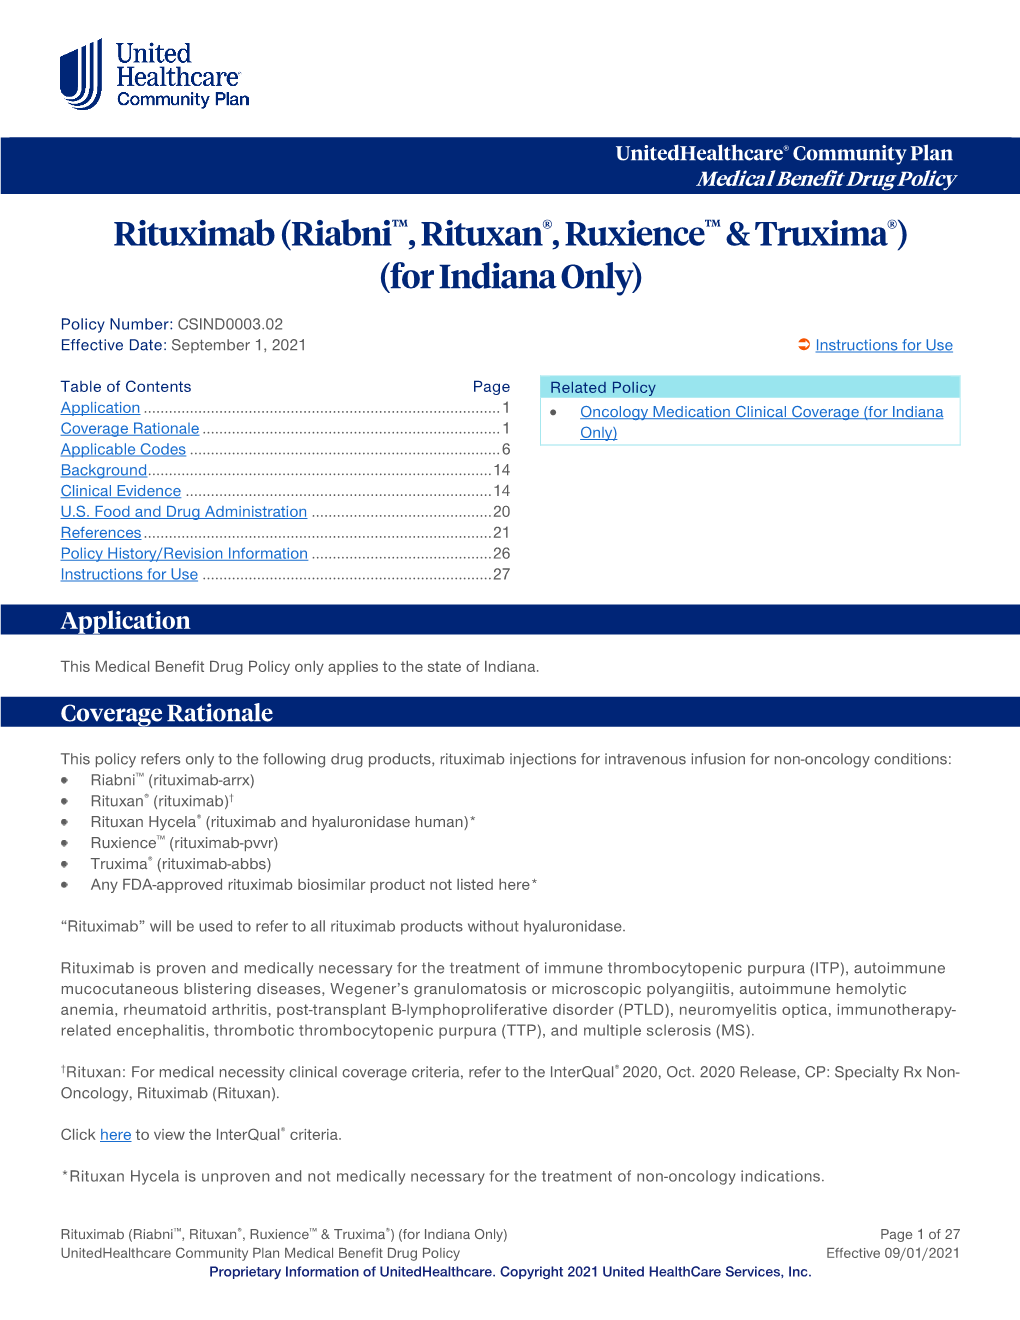 Rituximab (Riabni™, Rituxan®, Ruxience™ & Truxima®) (For Indiana Only)